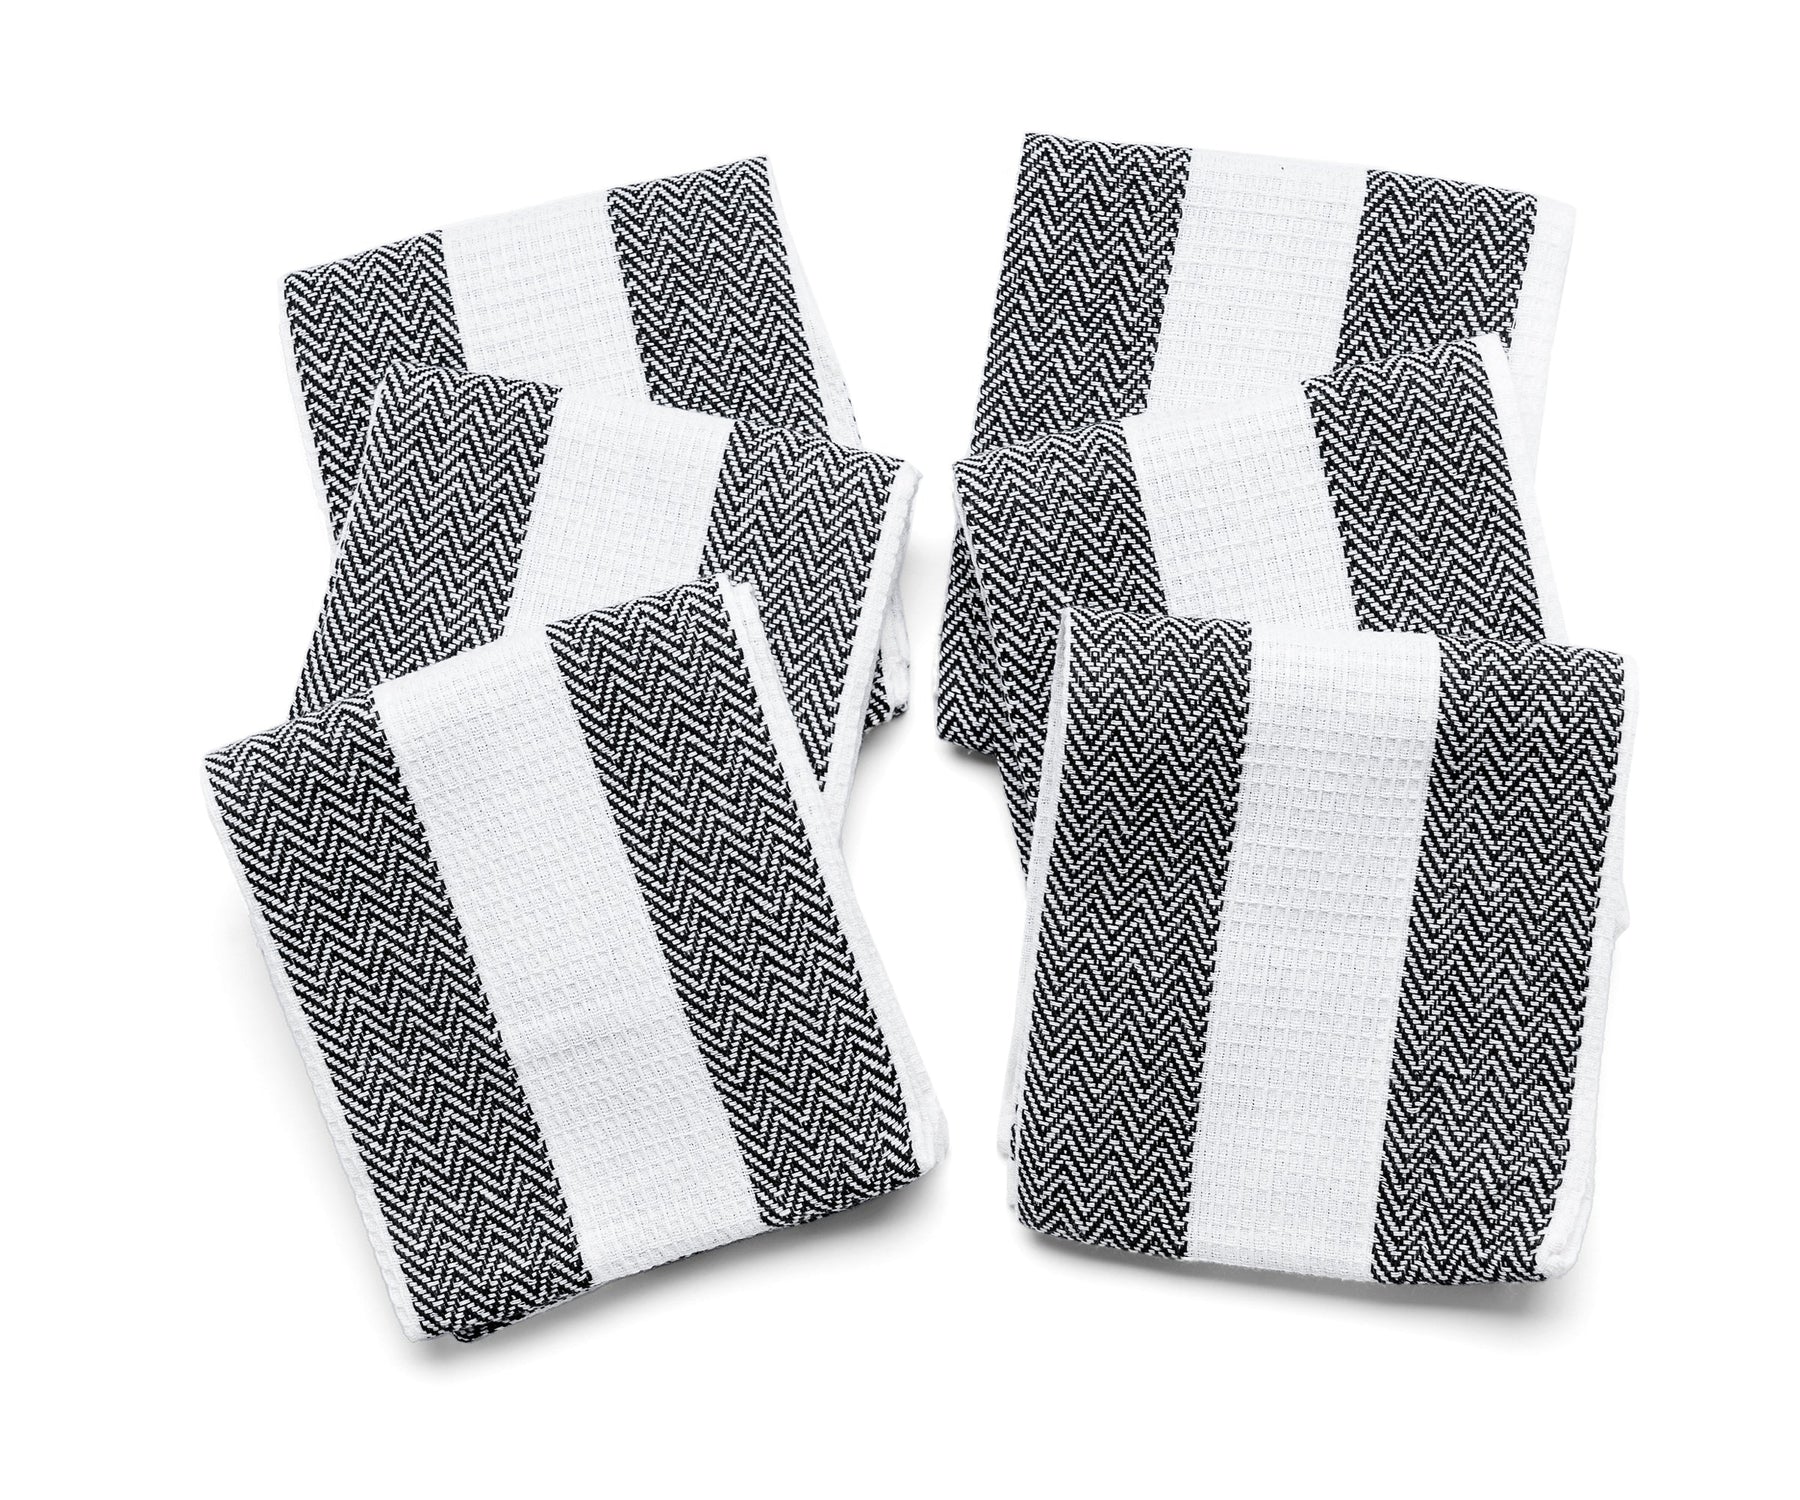 Dish towels, durable and absorbent for kitchen use.